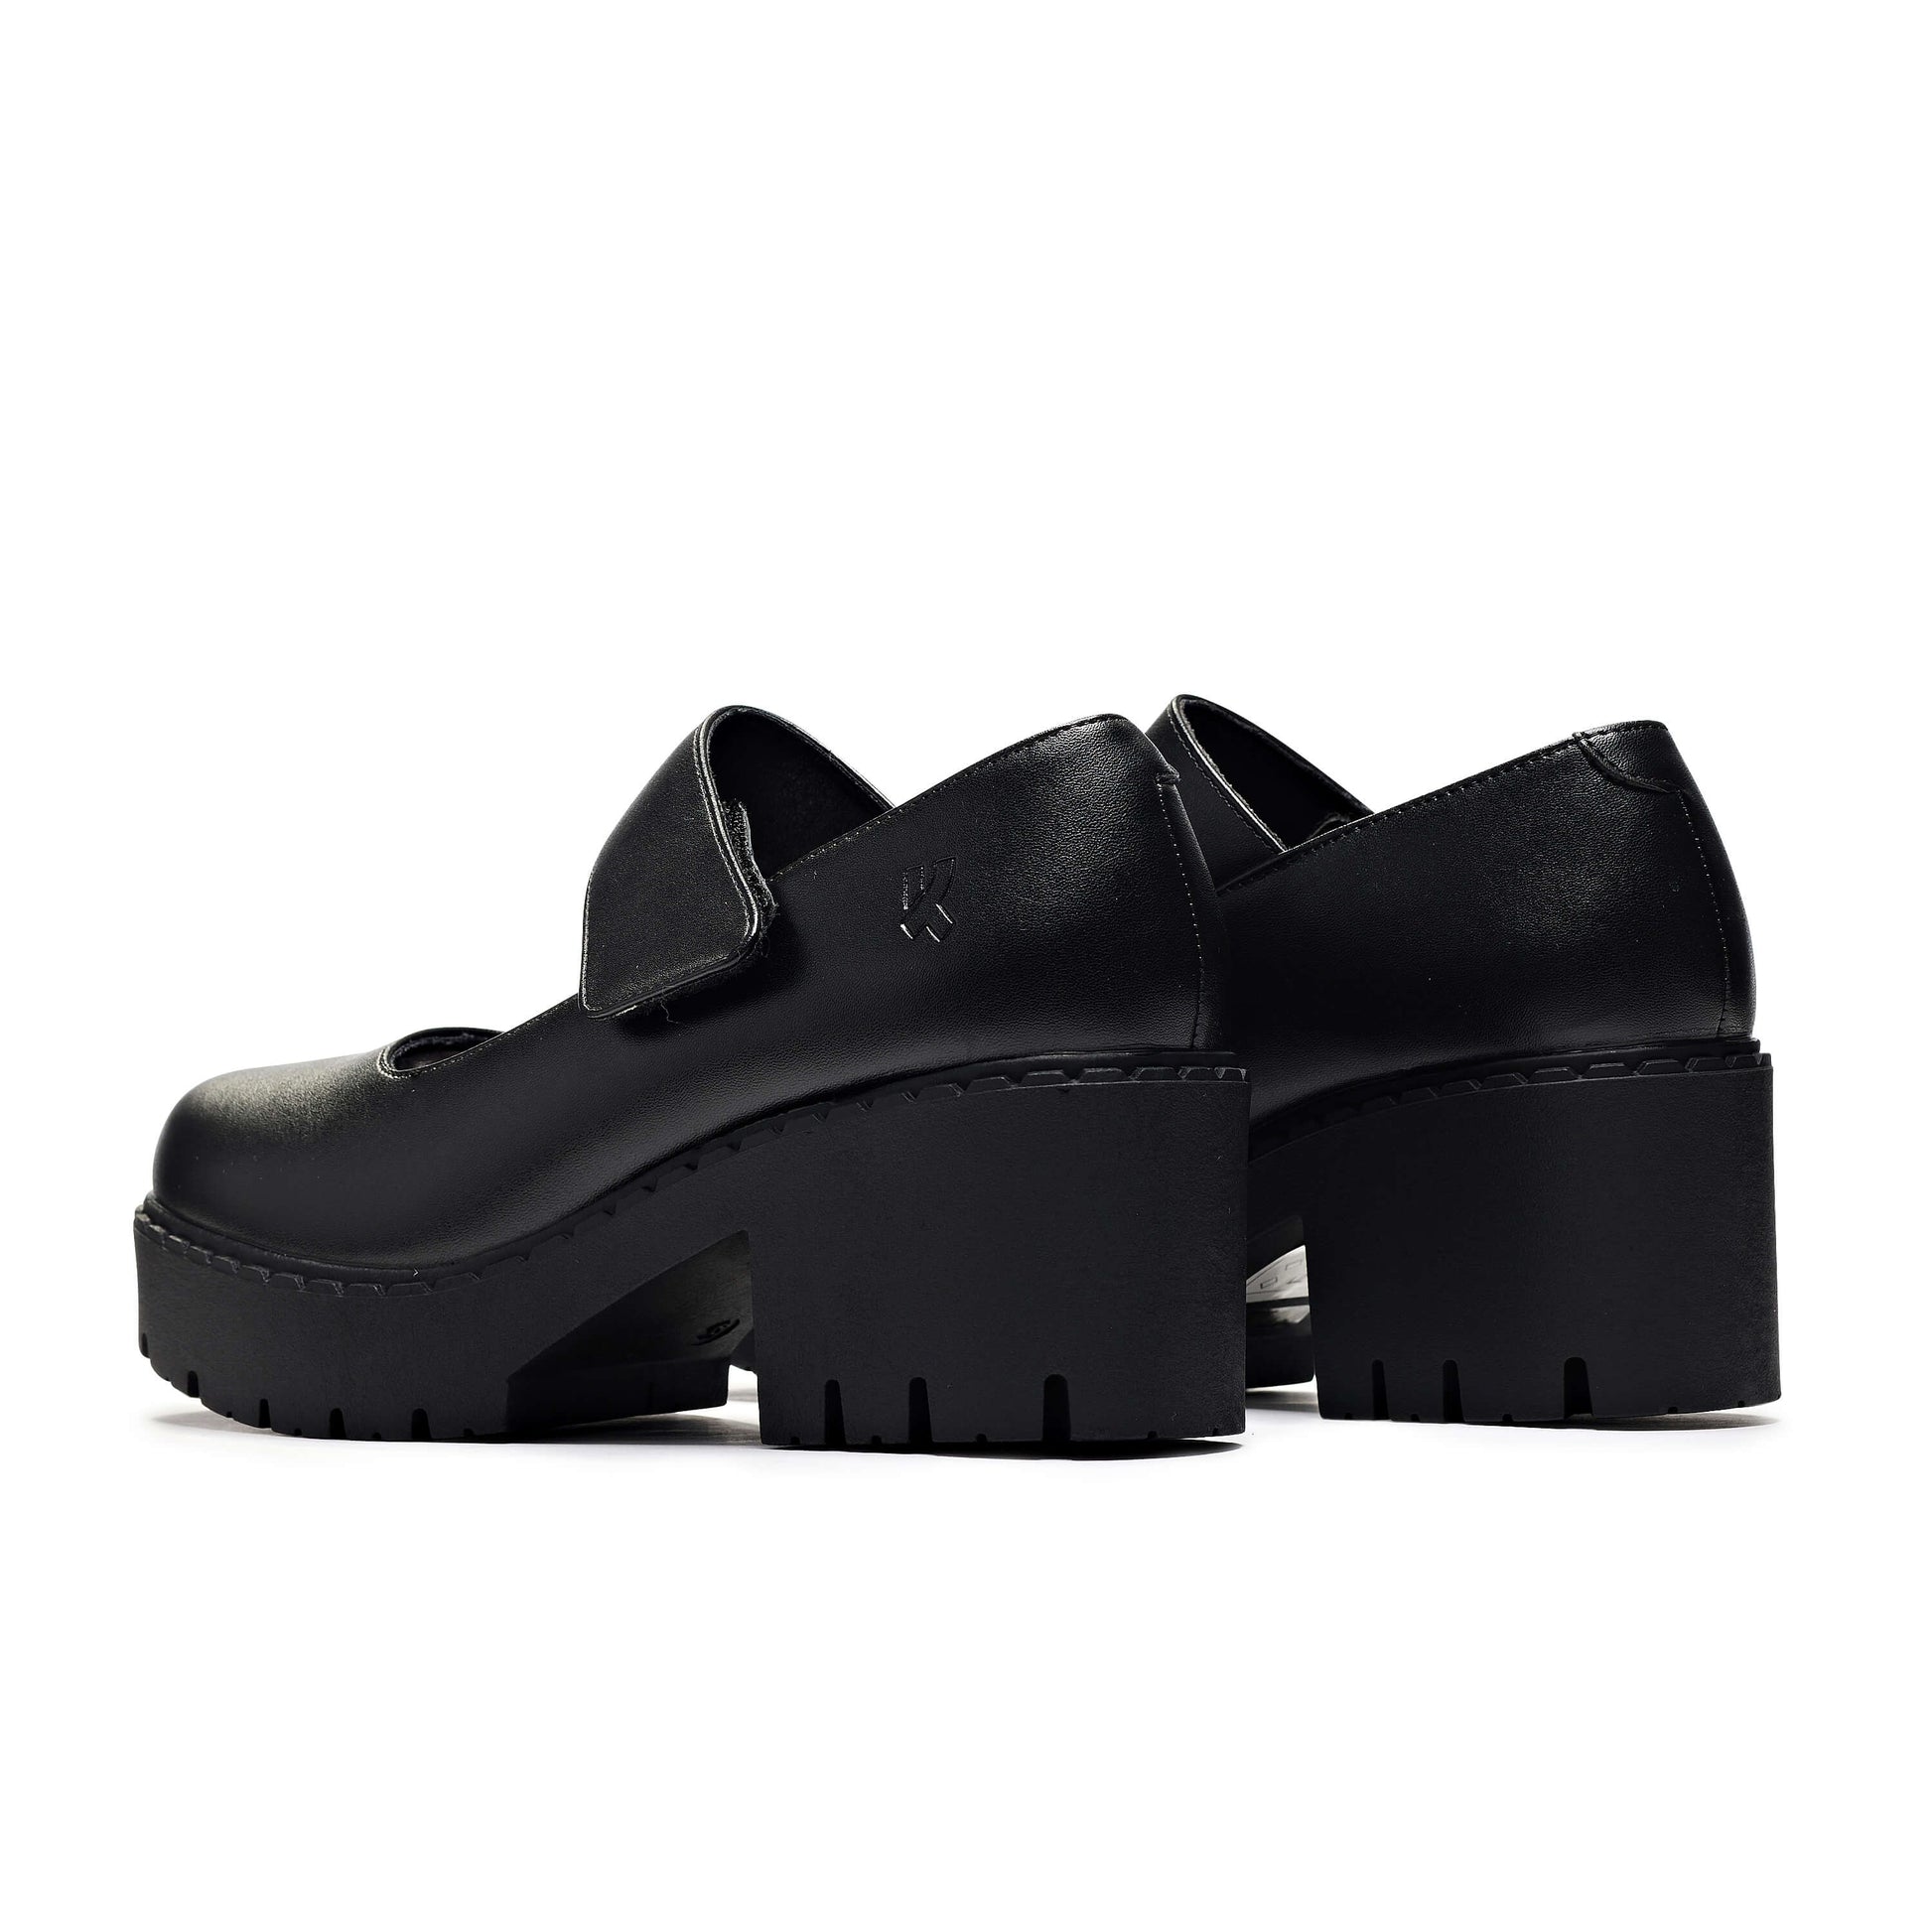 Beacons Switch Mary Jane Shoes - Mary Janes - KOI Footwear - Black - Back View